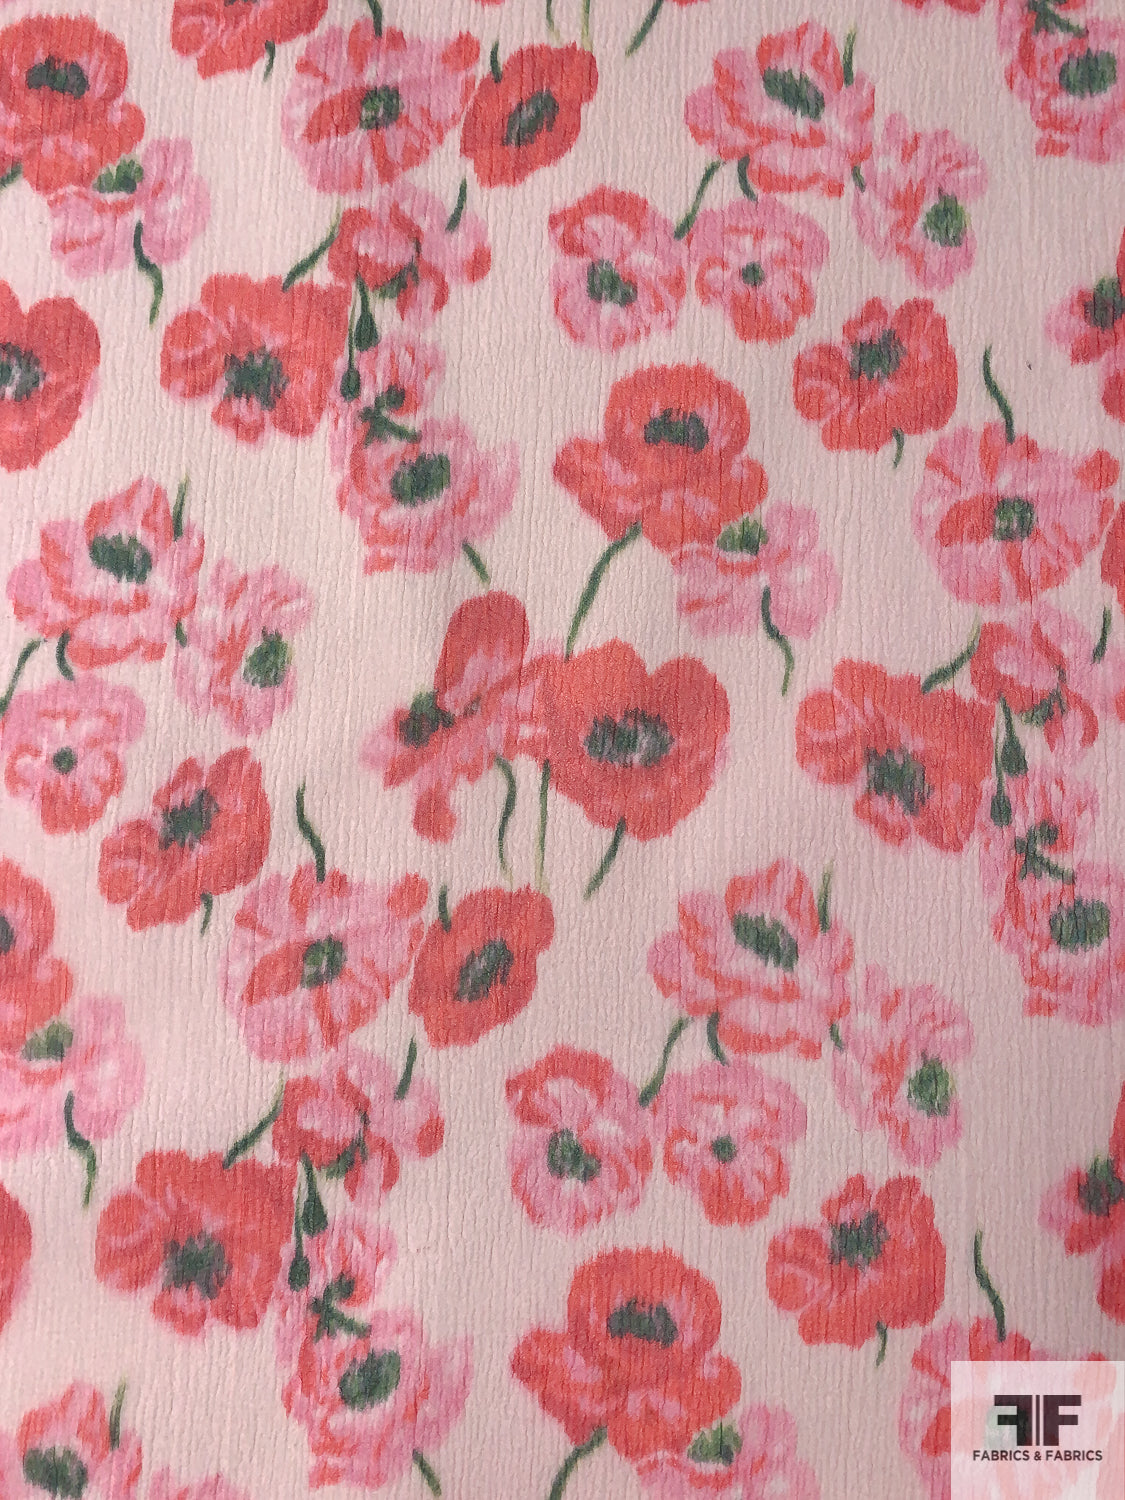 Italian Floral Poppy Printed Crinkled Polyester Organza - Hot Cherry / Shades of Pink